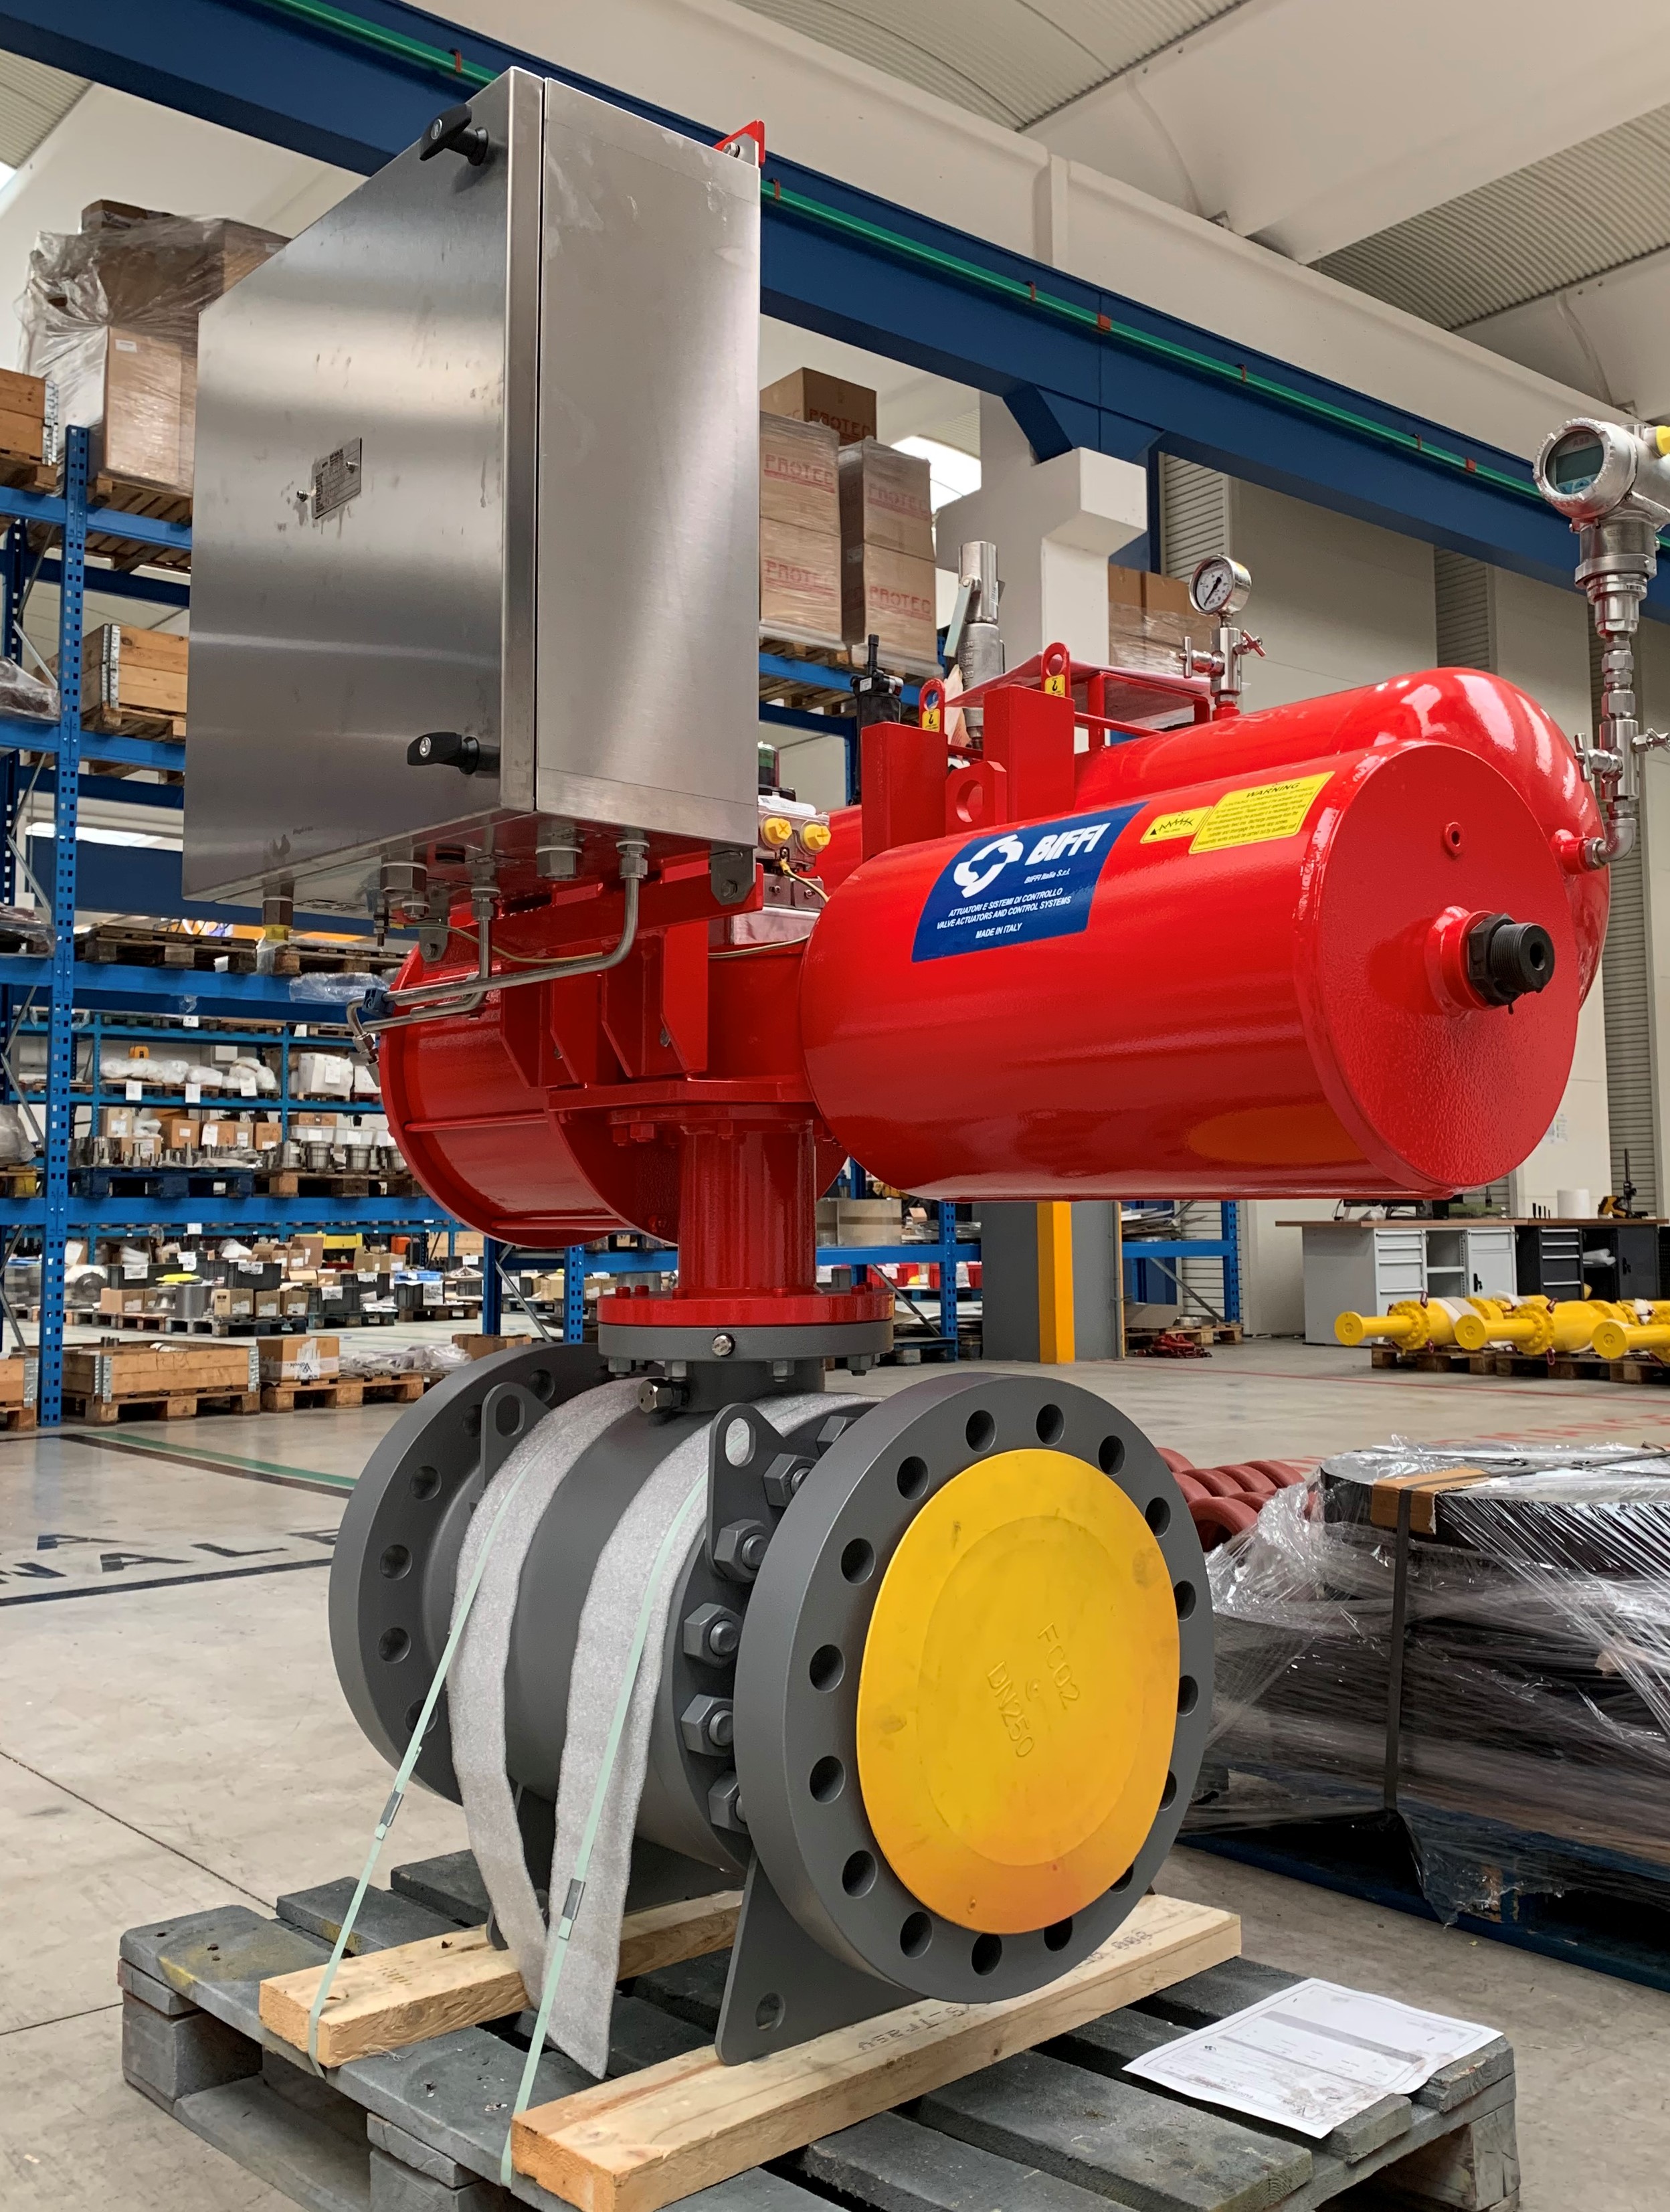 Ball Valves with Pneumatic Actuator and Control Panel for NCOC